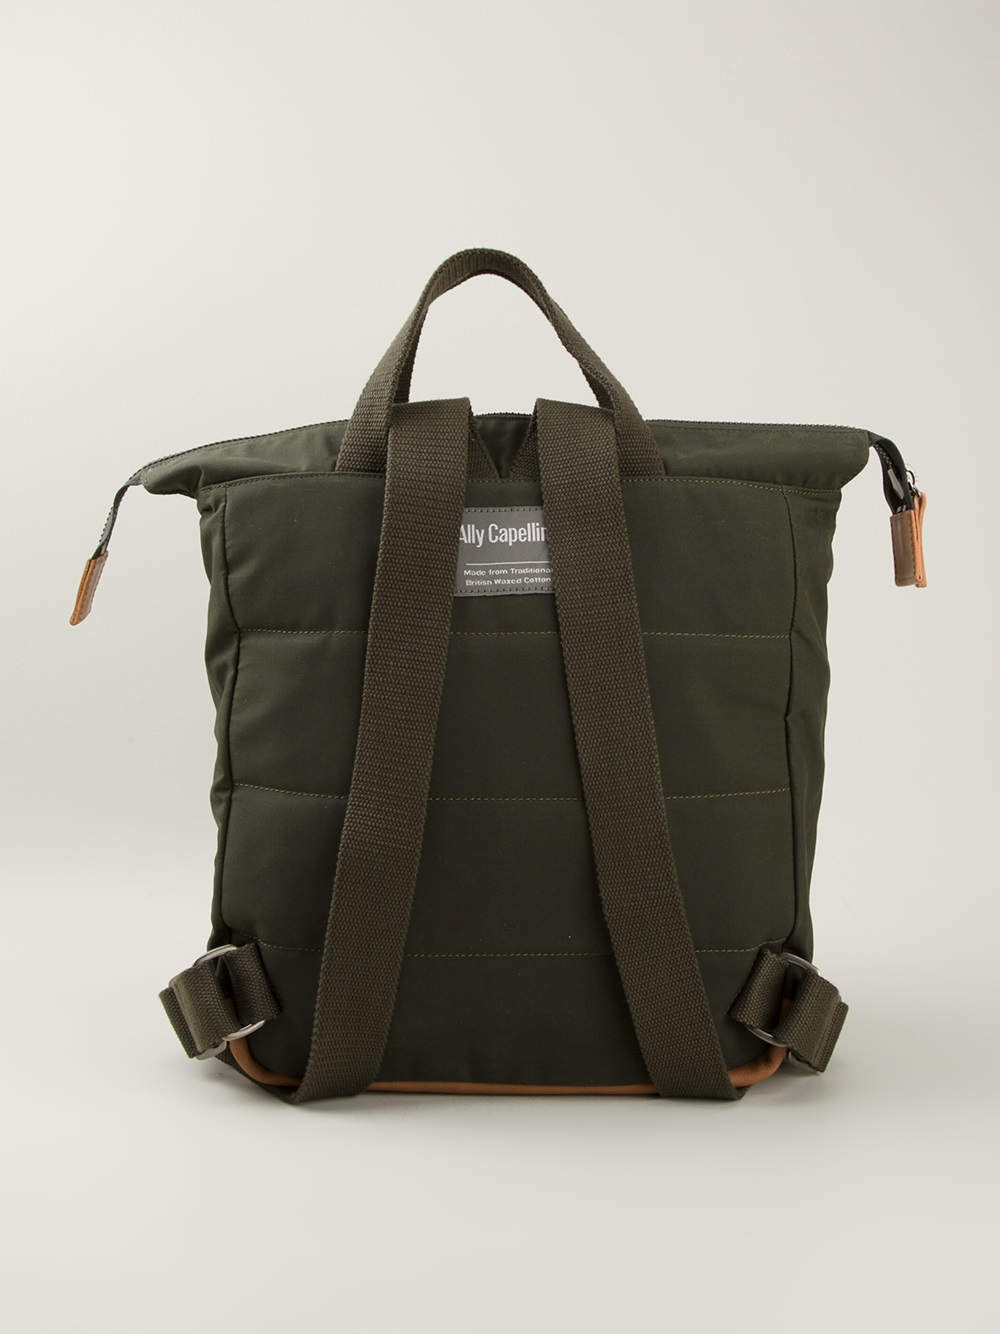 Lyst - Ally Capellino Frances Bag in Green for Men